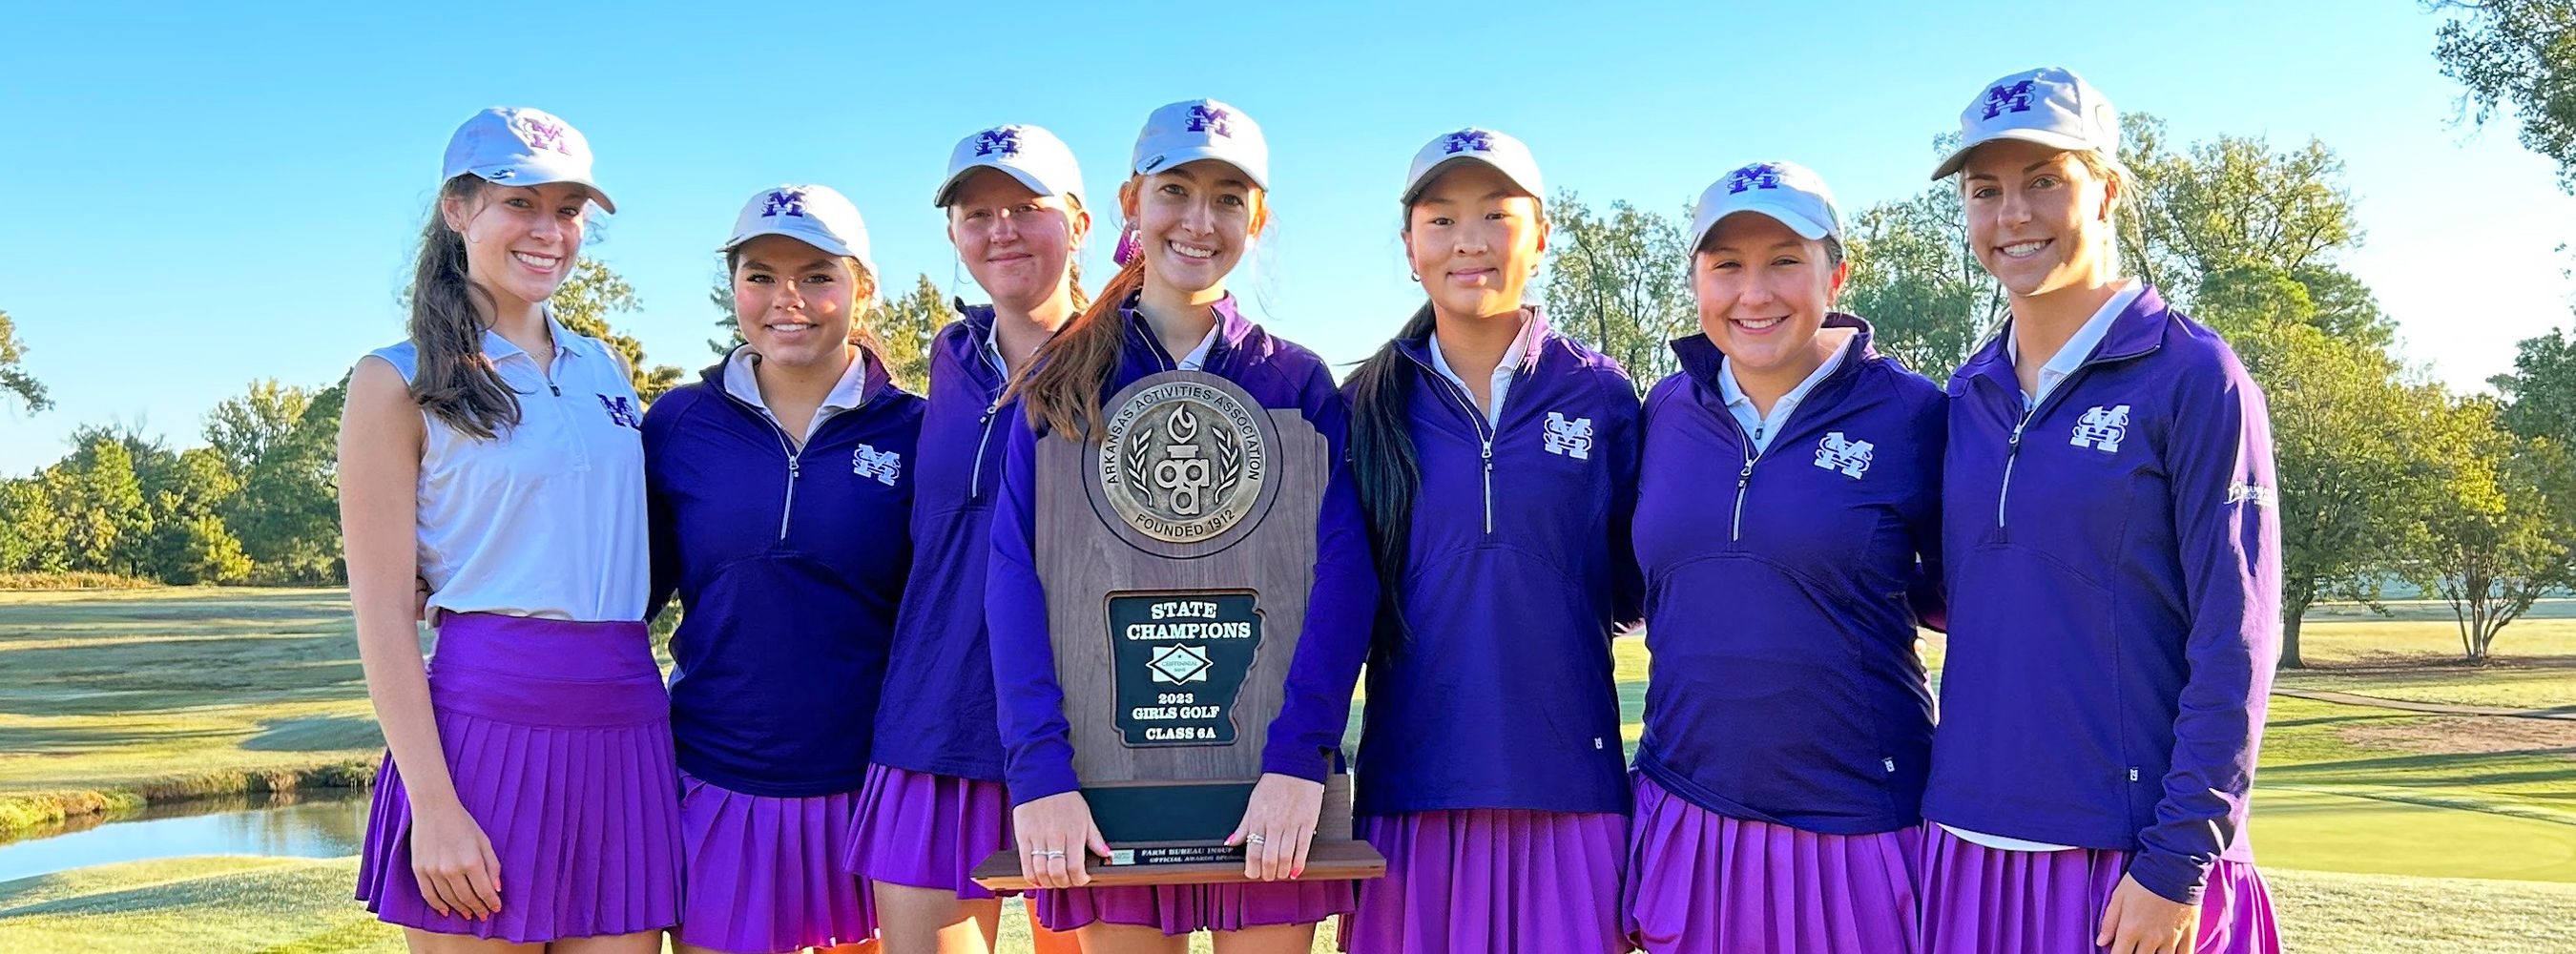 members of the Golf Belles standing with their State Championship trophy